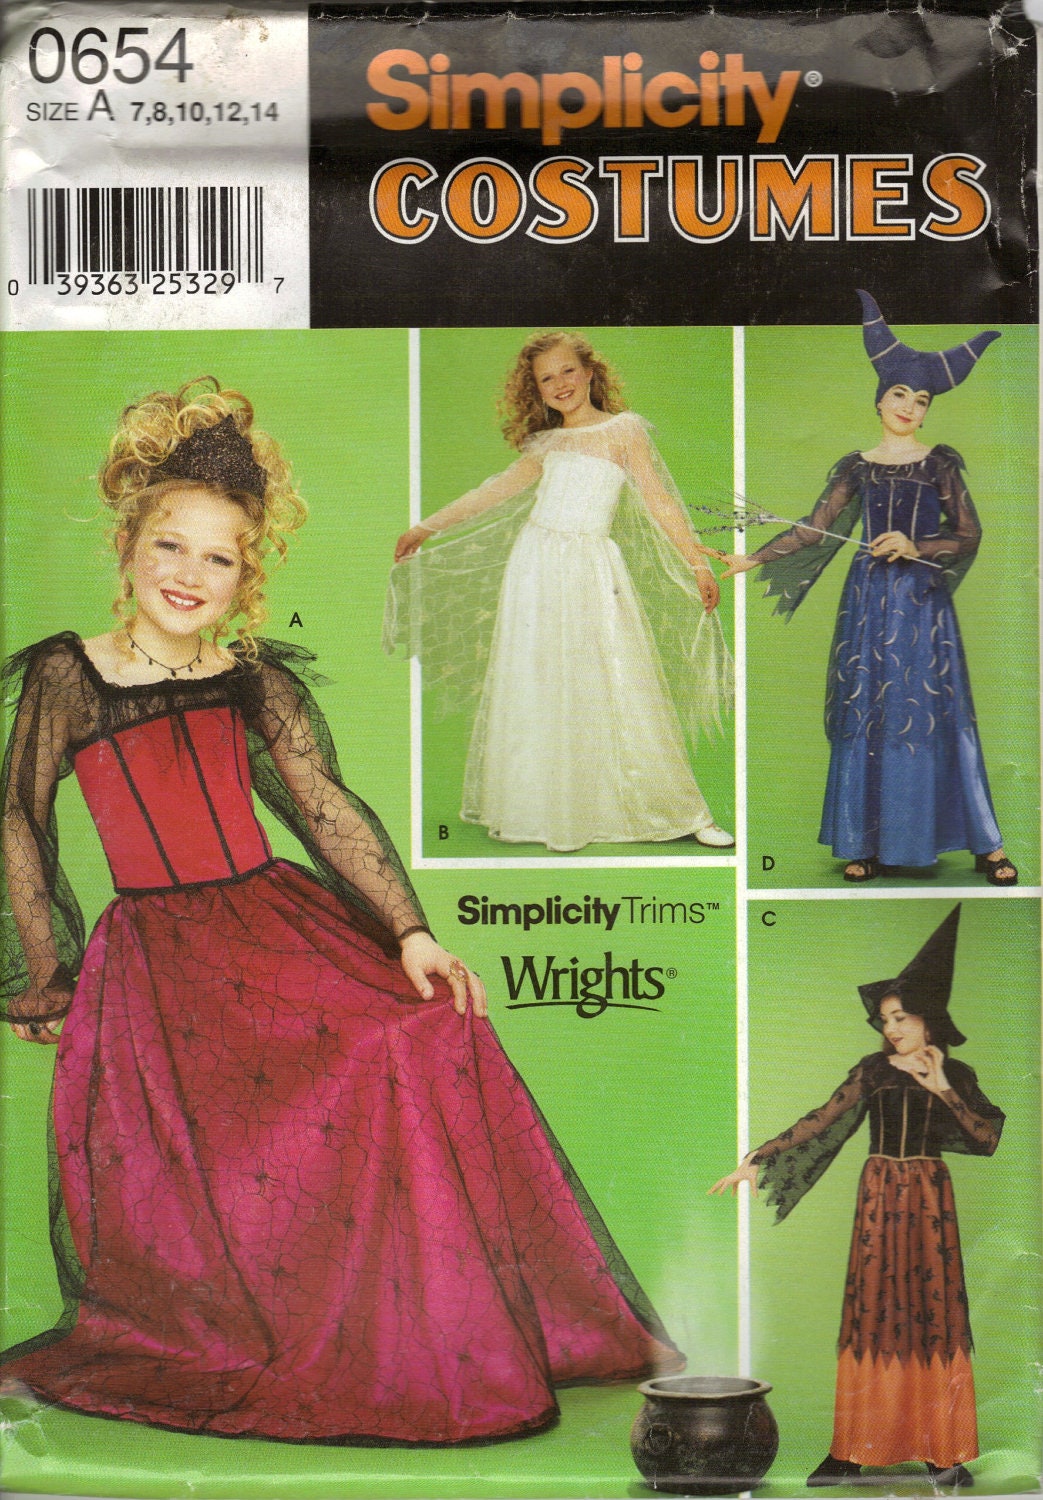 Simplicity Costume Sewing Pattern 0629 or 0654 Misses'